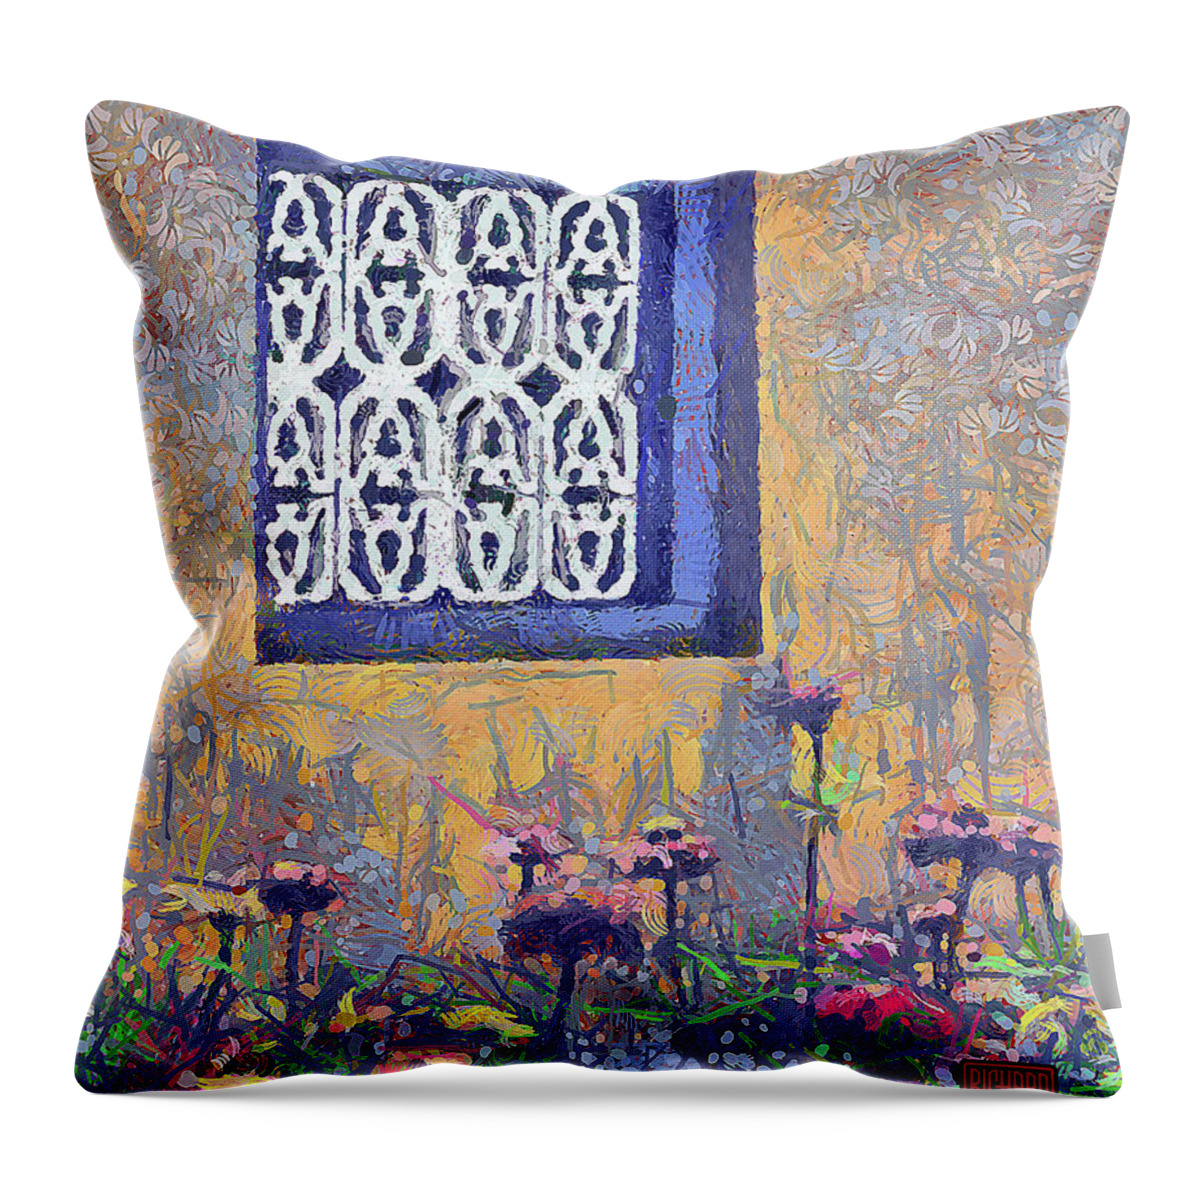 Abstract Throw Pillow featuring the mixed media 683 A Kaleidoscope Of Color Under A Little Window, The Citadel, Hue, Vietnam by Richard Neuman Architectural Gifts